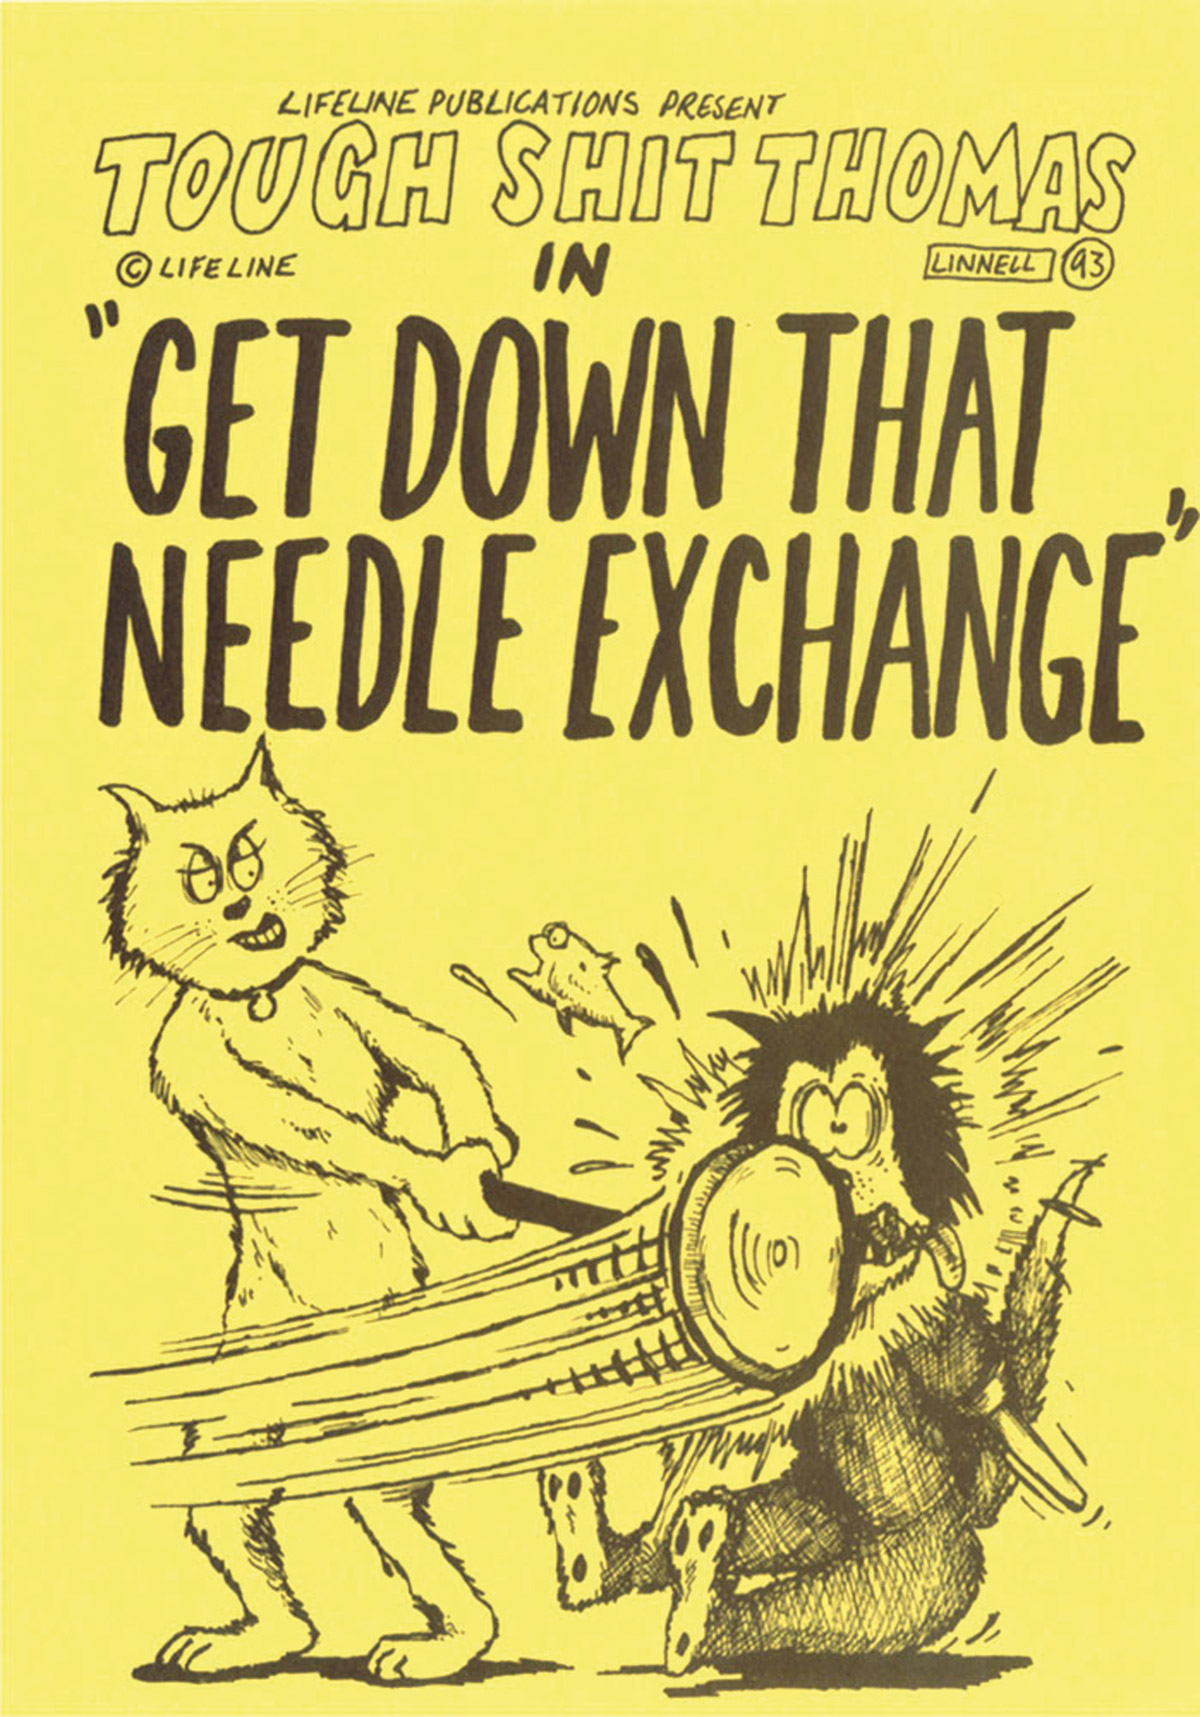 Lifeline, Get Down That Needle Exchange, 1993: Leaflet. Illustration by Michael Linnell © Lifeline.  Image used courtesy of Michael Linnell, who also has an online archive of his drug-related work; http://michaellinnell.org.uk/archive.html